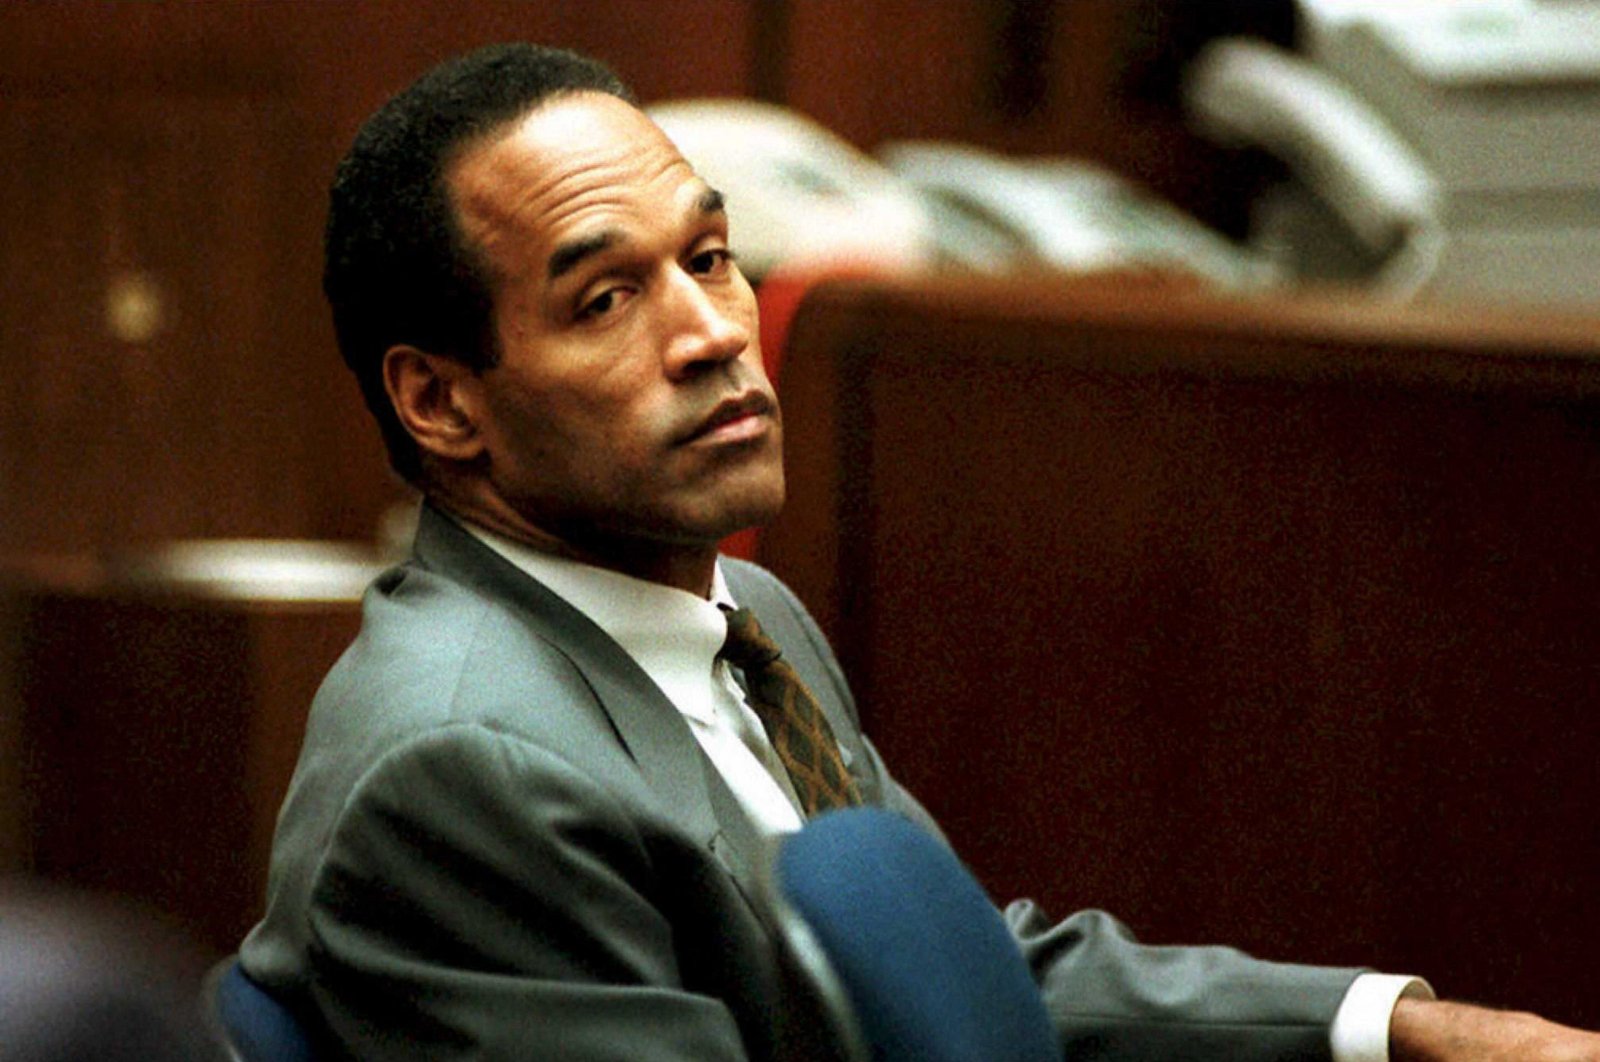 O. J. Simpson sits in Superior Court during an open court session where Judge Lance Ito denied a media attorney&#039;s request to open court transcripts from a Dec. 7 private meeting involving prospective jurors, Los Angeles, U.S., Dec. 8, 1994. (AFP Photo)